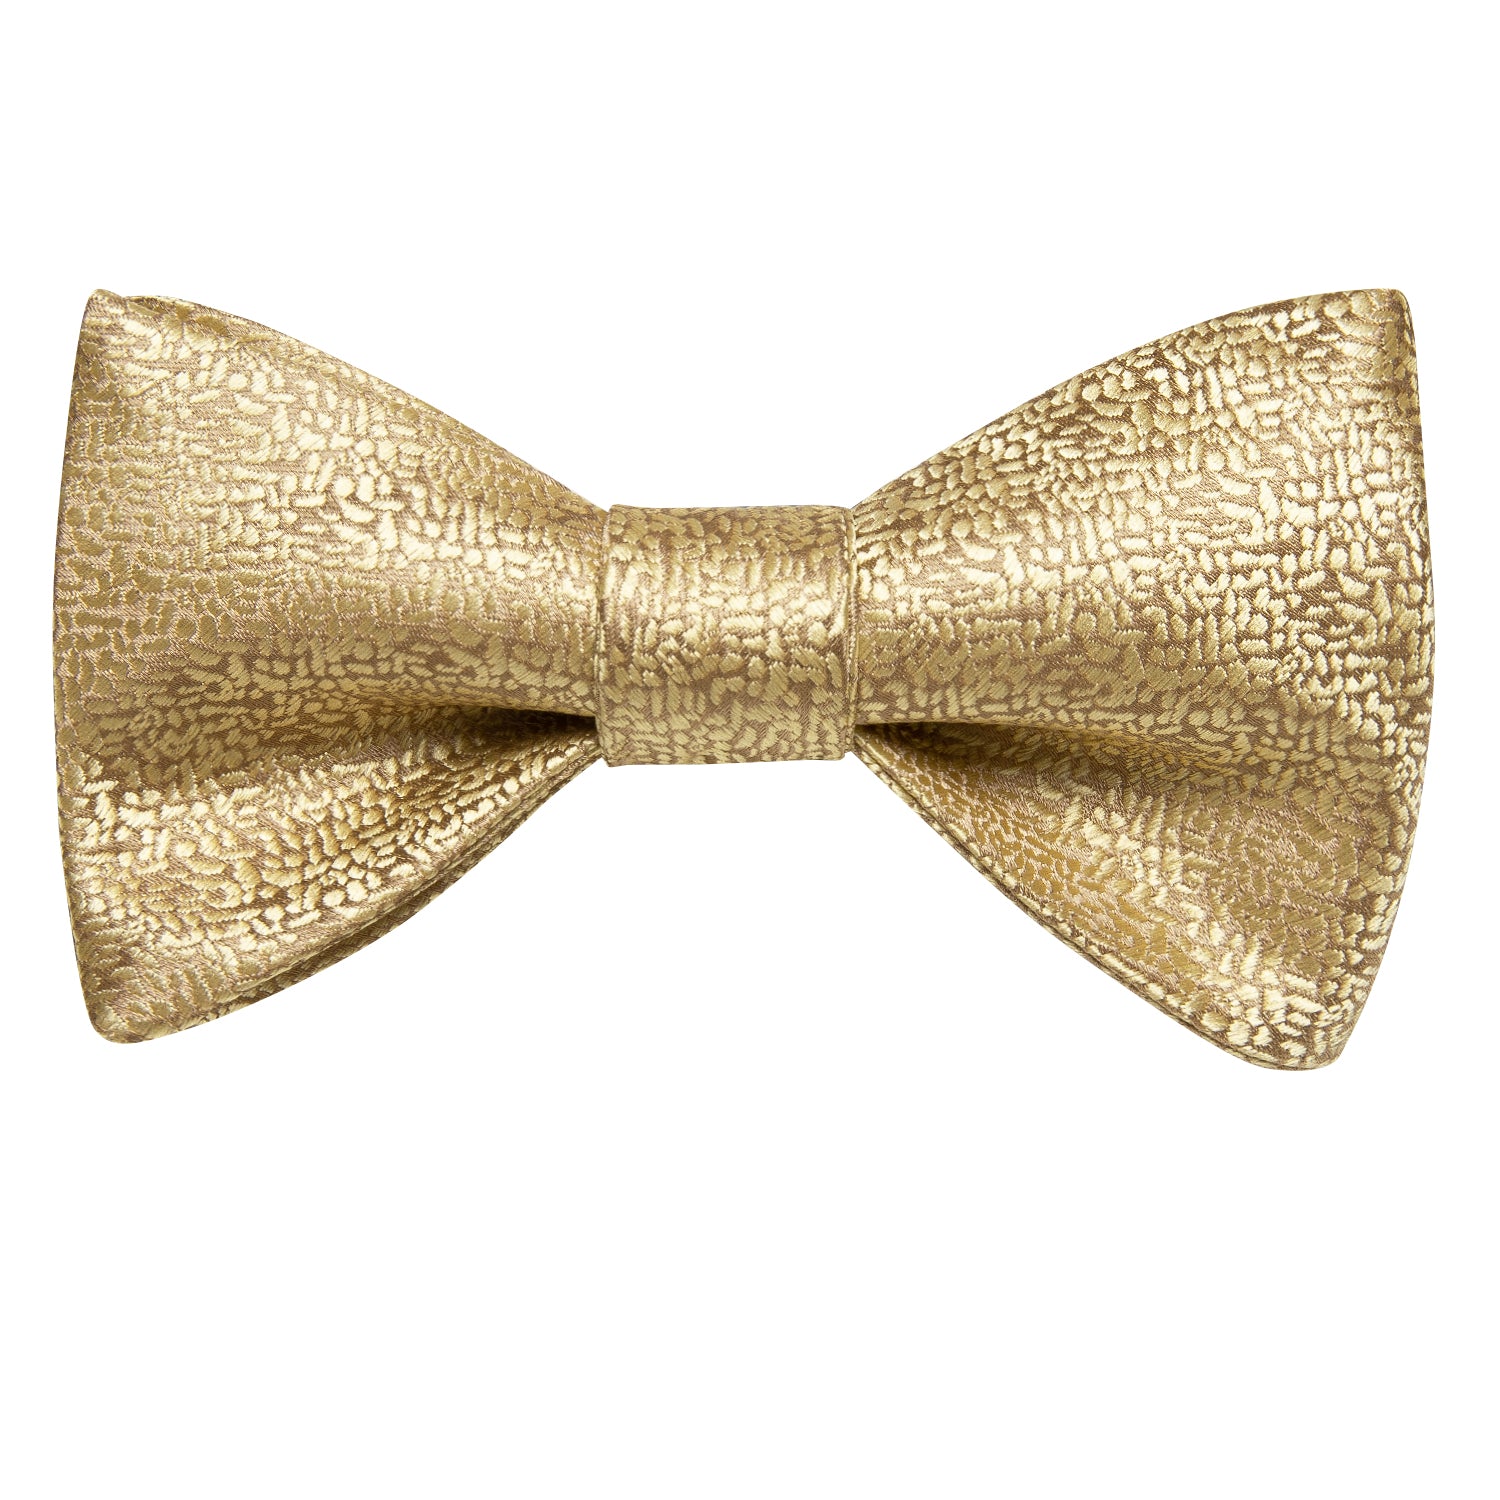 Champagne Golden Solid Self-tied Bow Tie Pocket Square Cufflinks Set